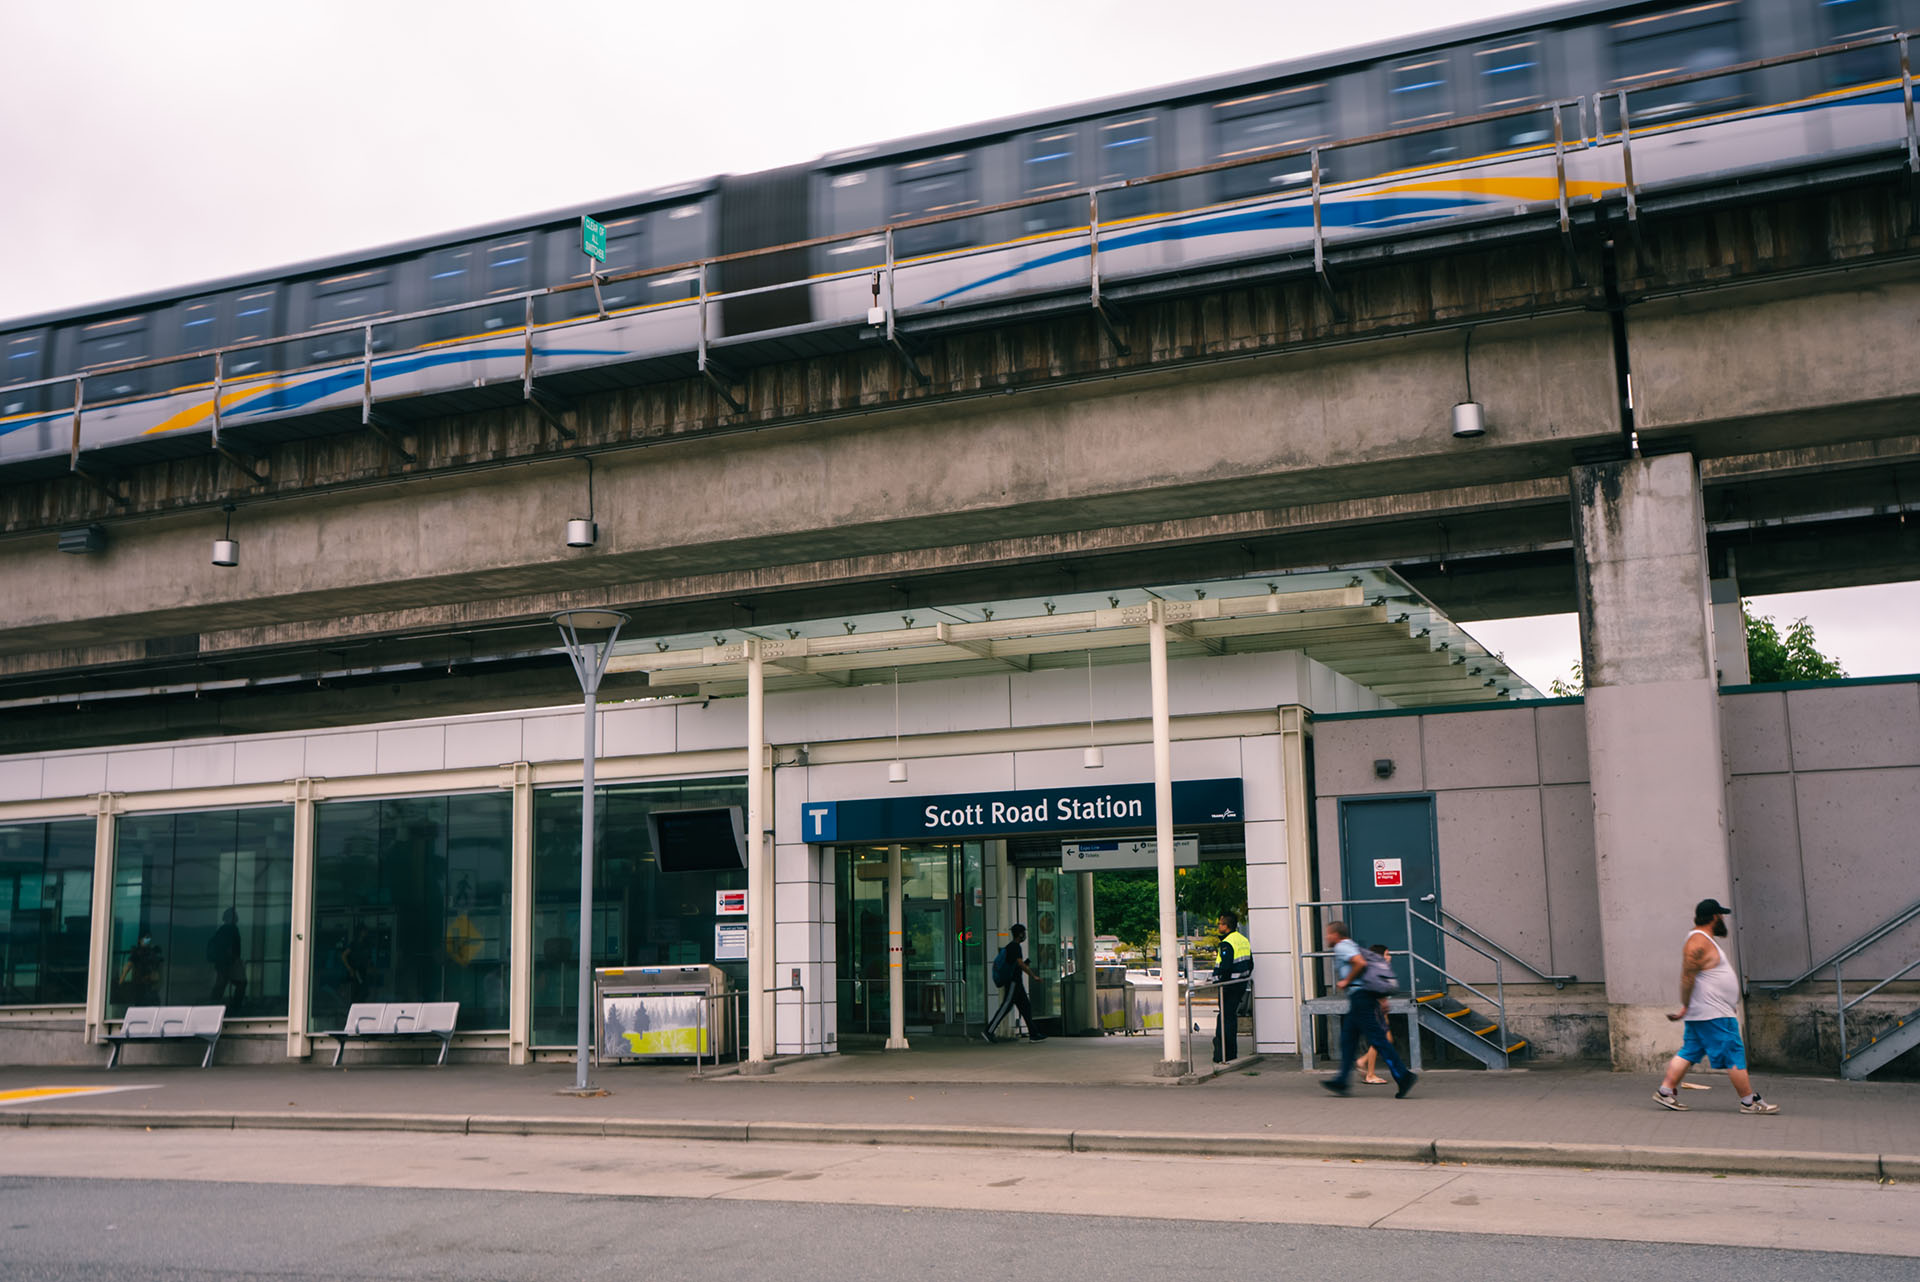 The entrance to Scott Road Station as the SkyTrain arrives